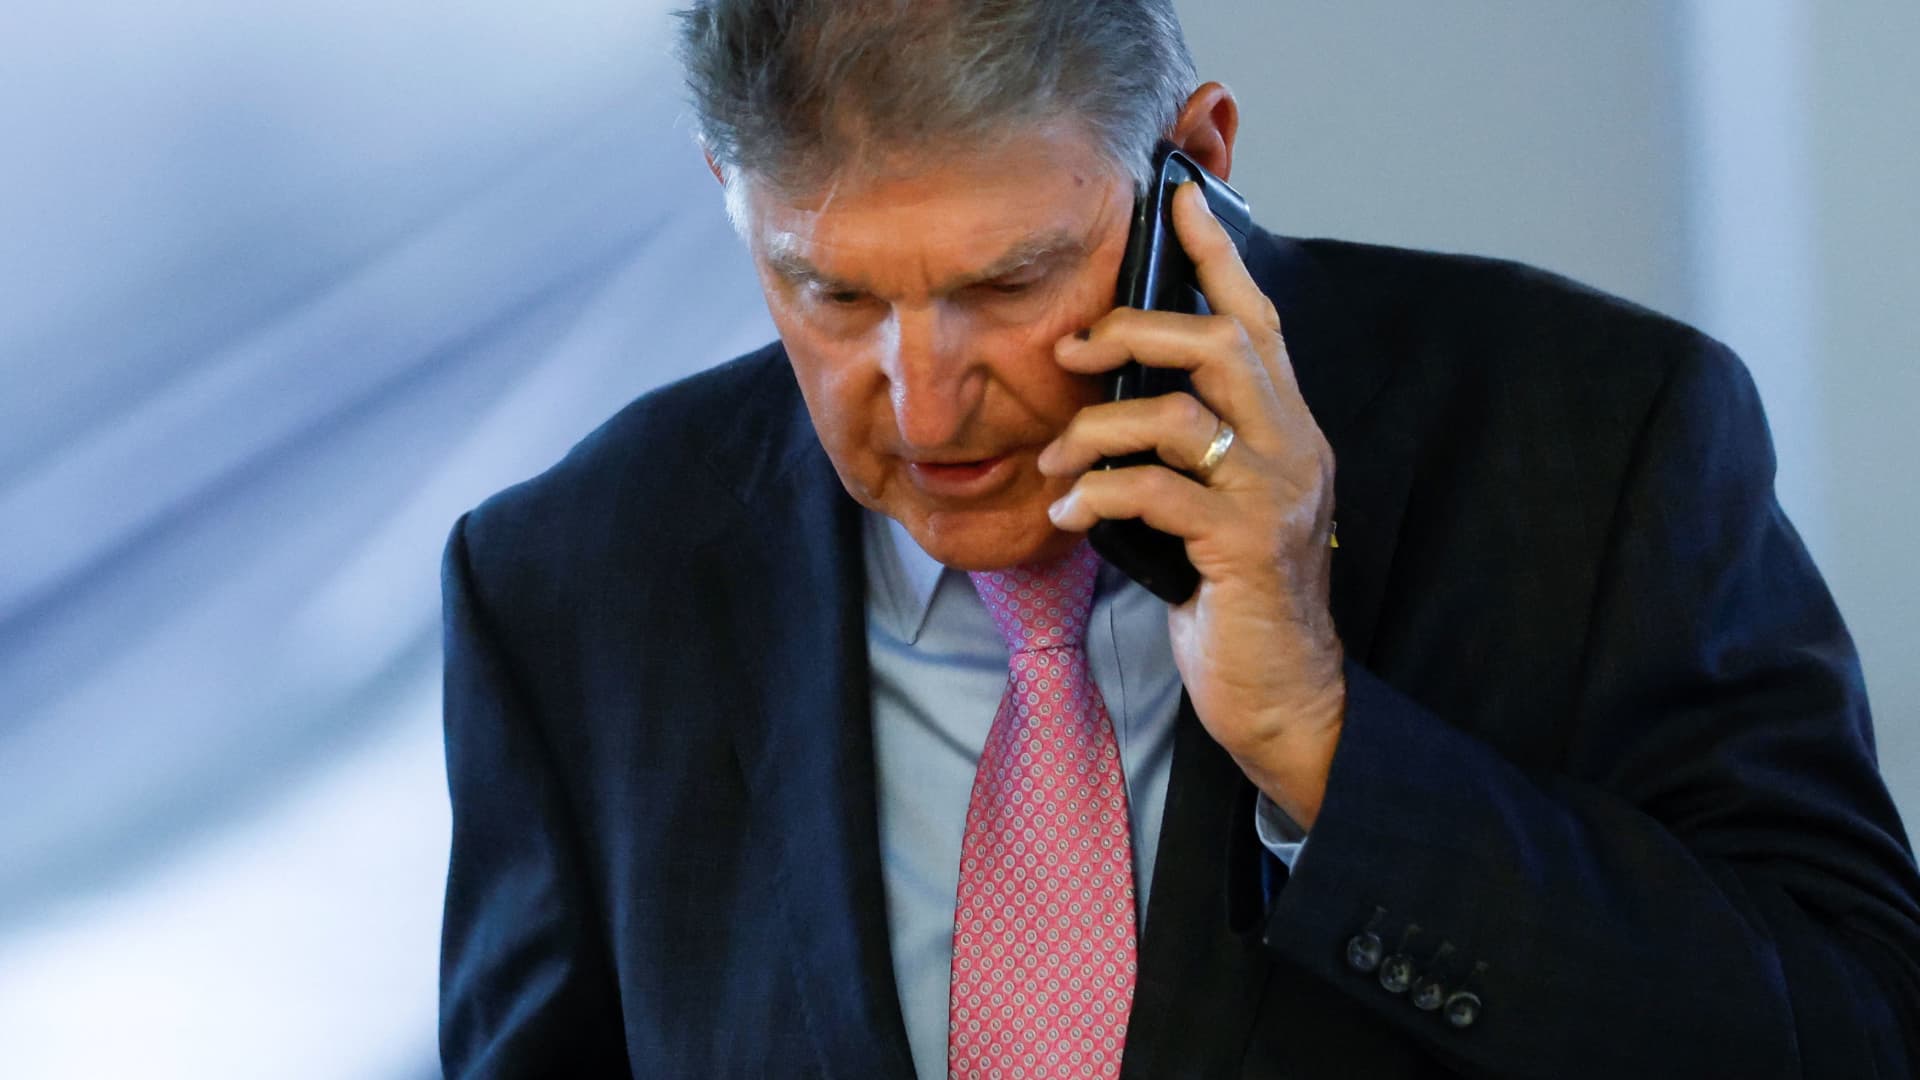 Joe Manchin raises over $1 million from donors including Patriots owner, Wall St..